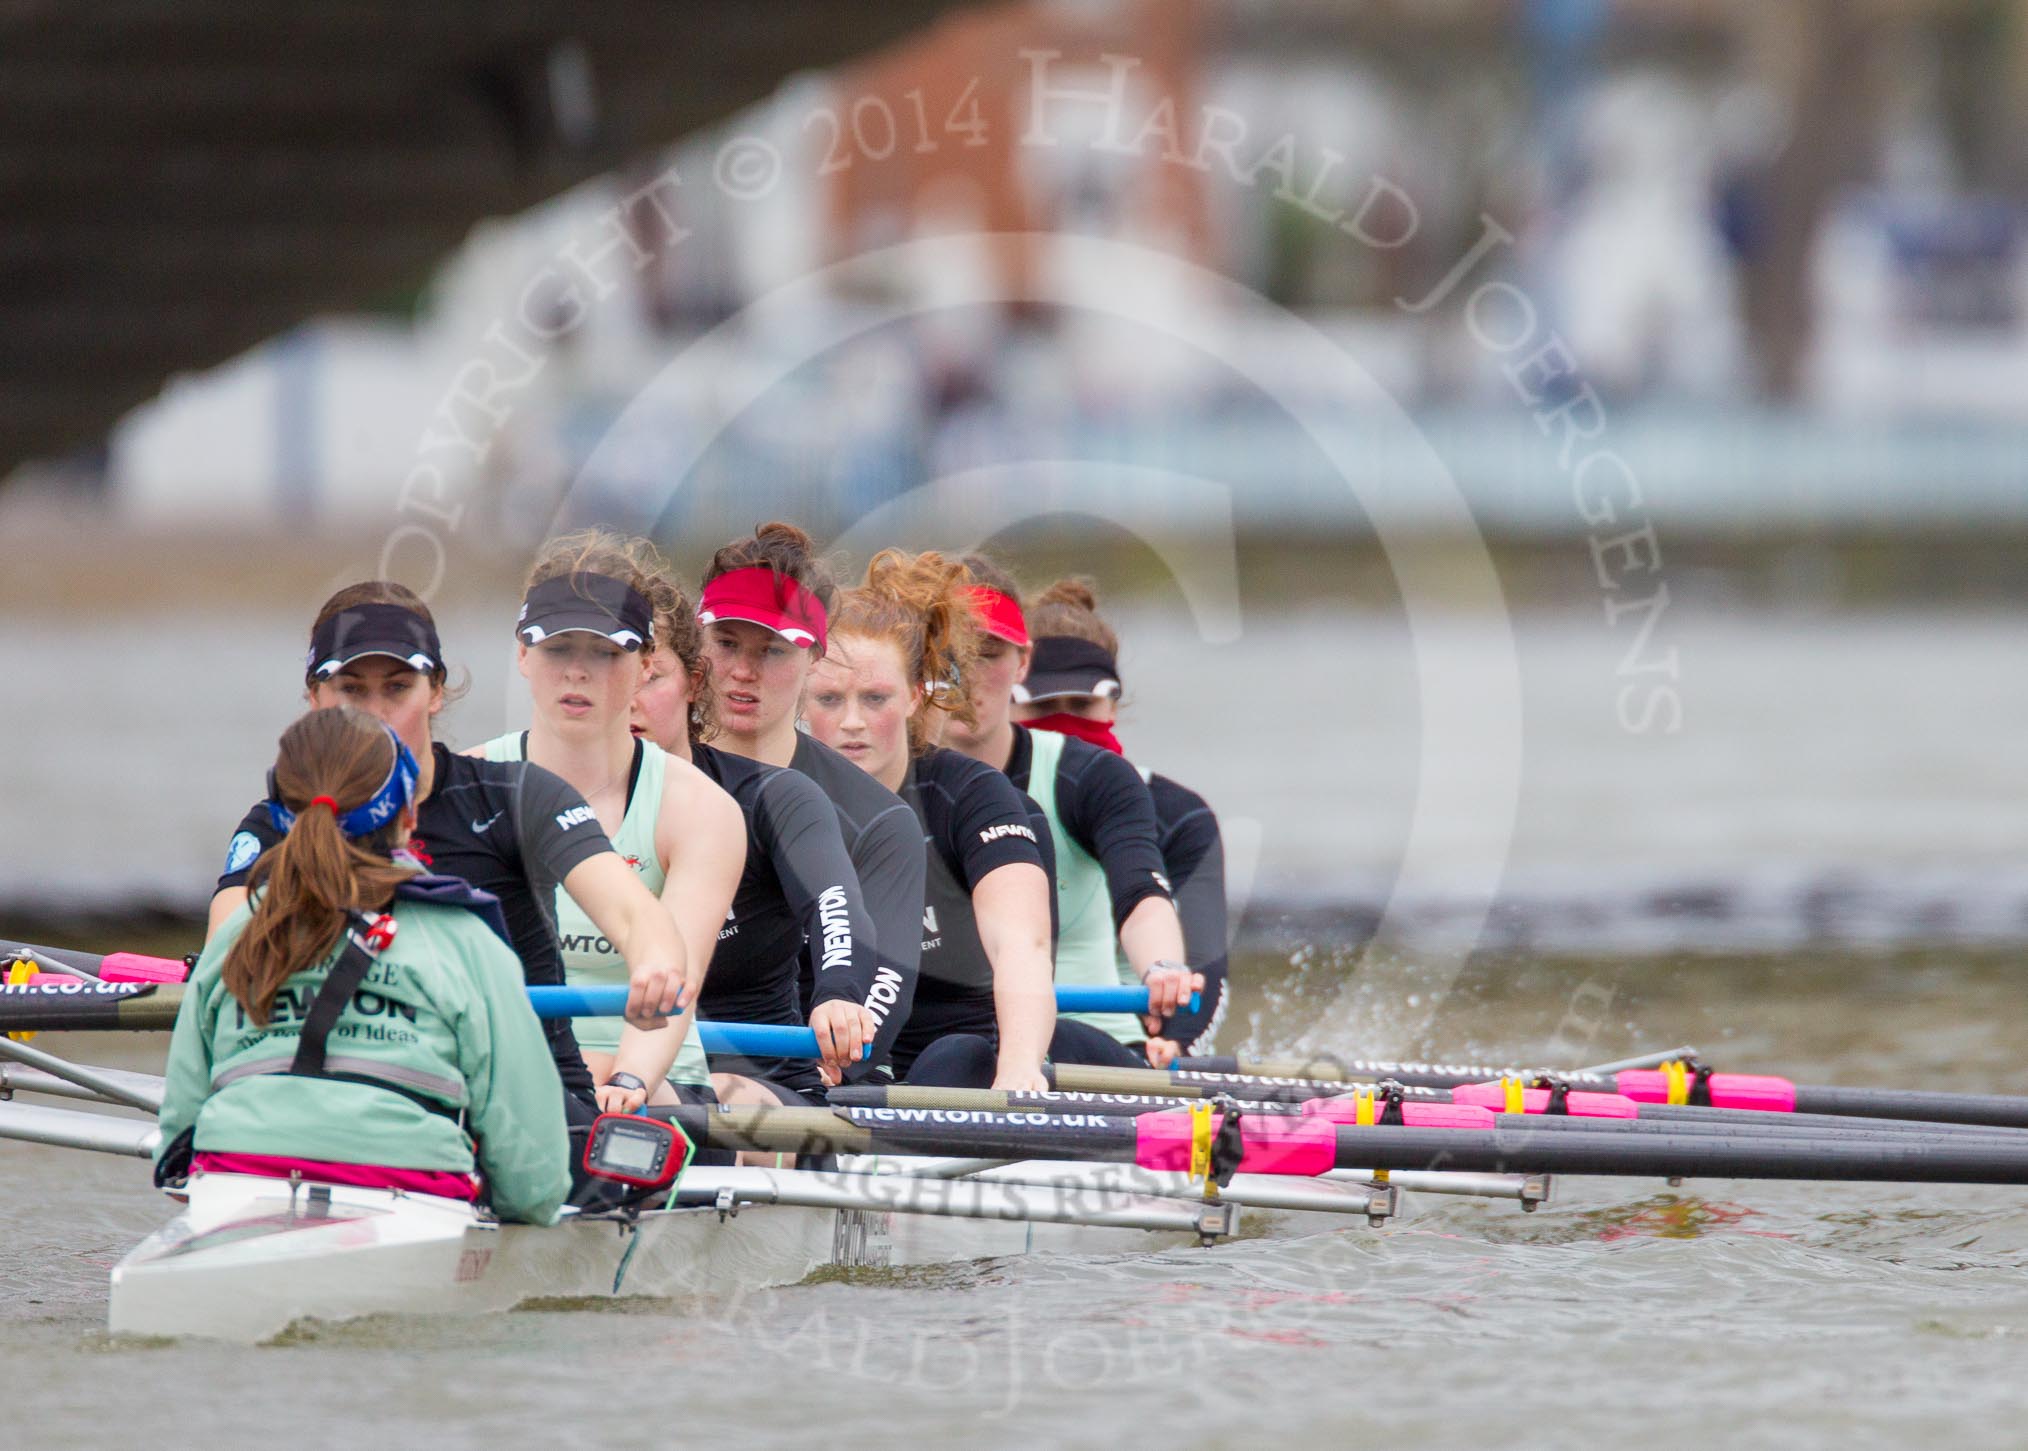 The Boat Race season 2014 - fixture CUWBC vs Thames RC.




on 02 March 2014 at 13:54, image #133